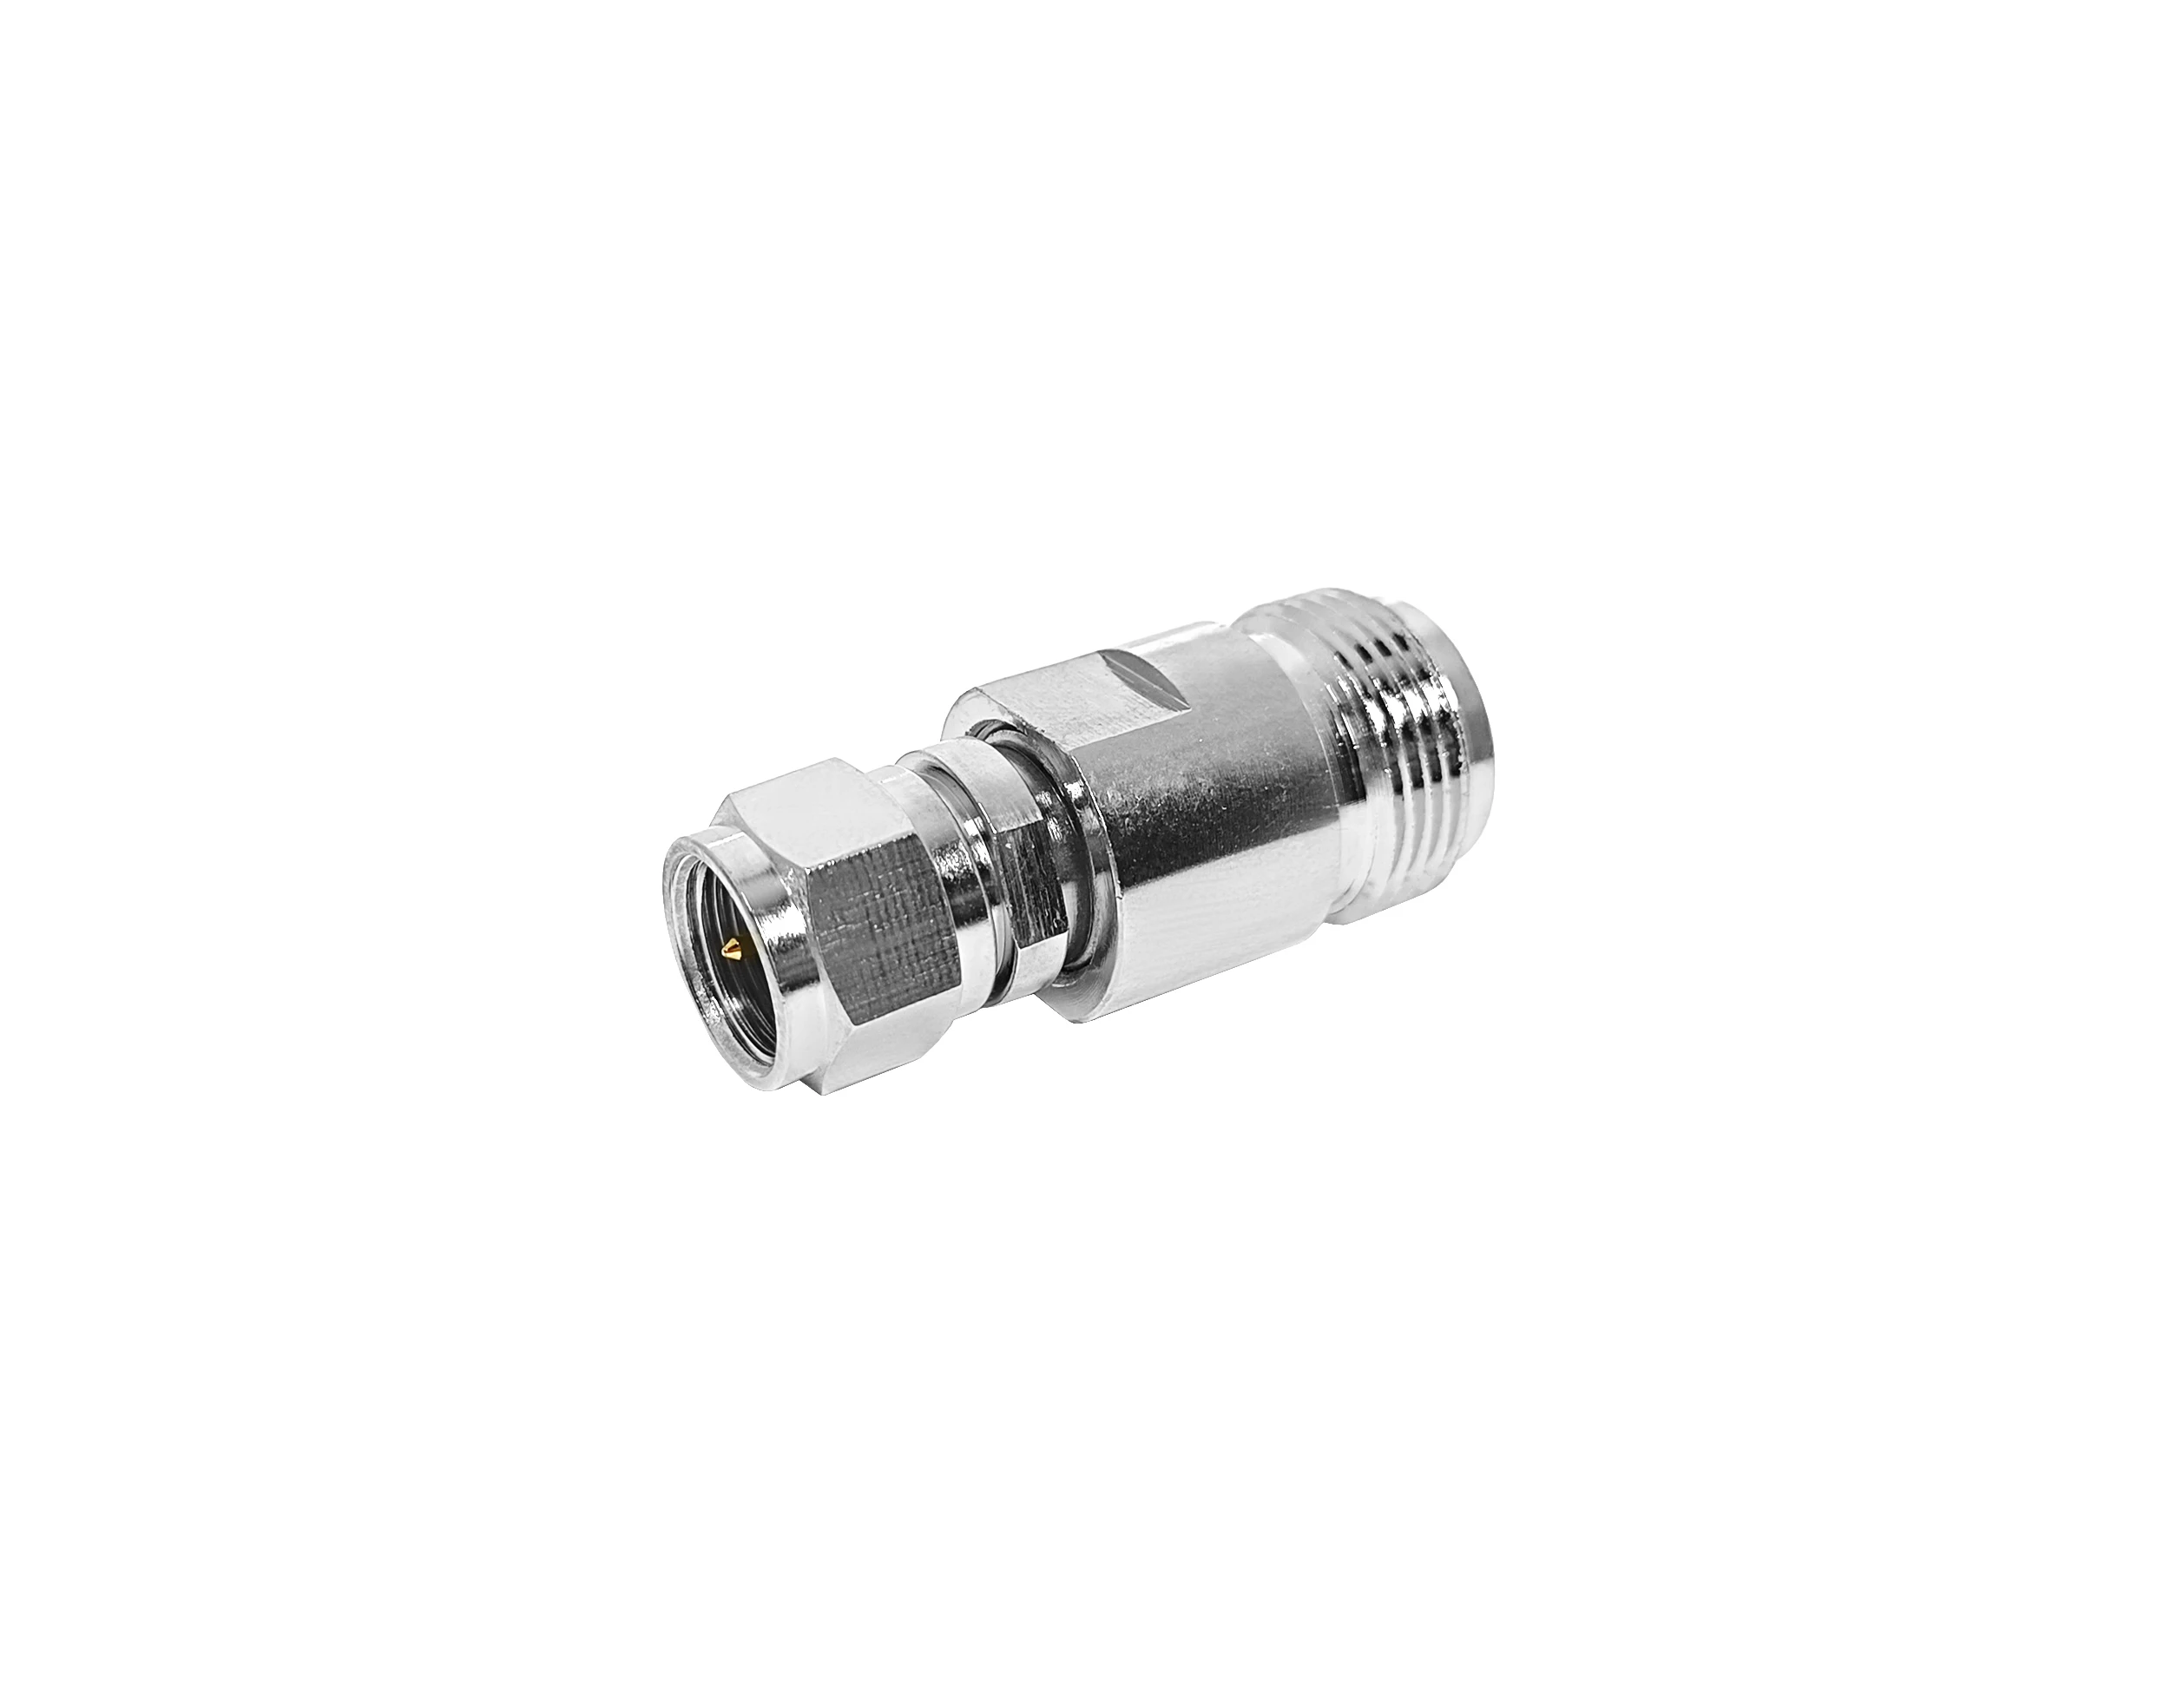 RF Coaxial Adapter N Female Jack to F Male Plug Adapter Connector factory